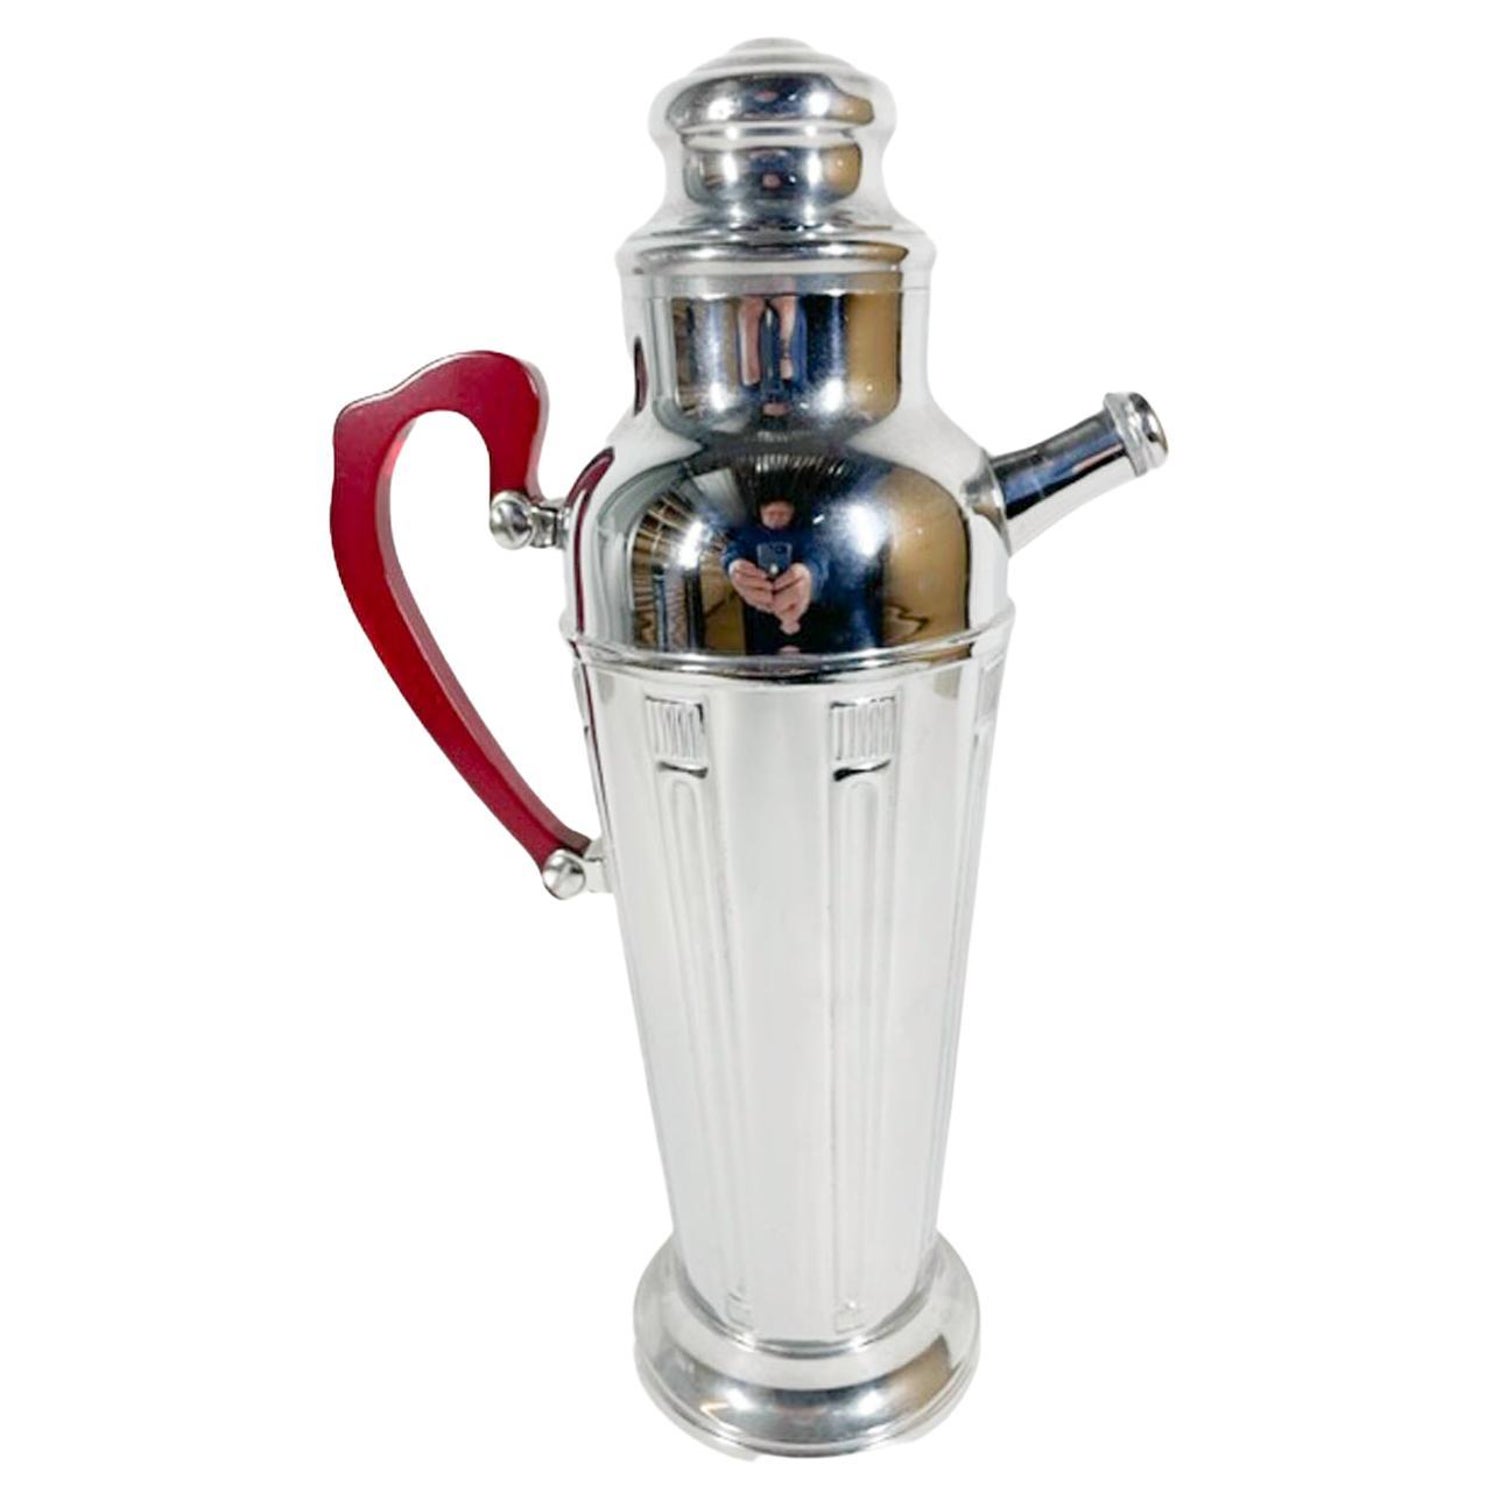 https://a.1stdibscdn.com/art-deco-urn-form-chrome-cocktail-shaker-with-molded-columns-red-lucite-handle-for-sale/f_13752/f_272580121644154572521/f_27258012_1644154572765_bg_processed.jpg?width=1500